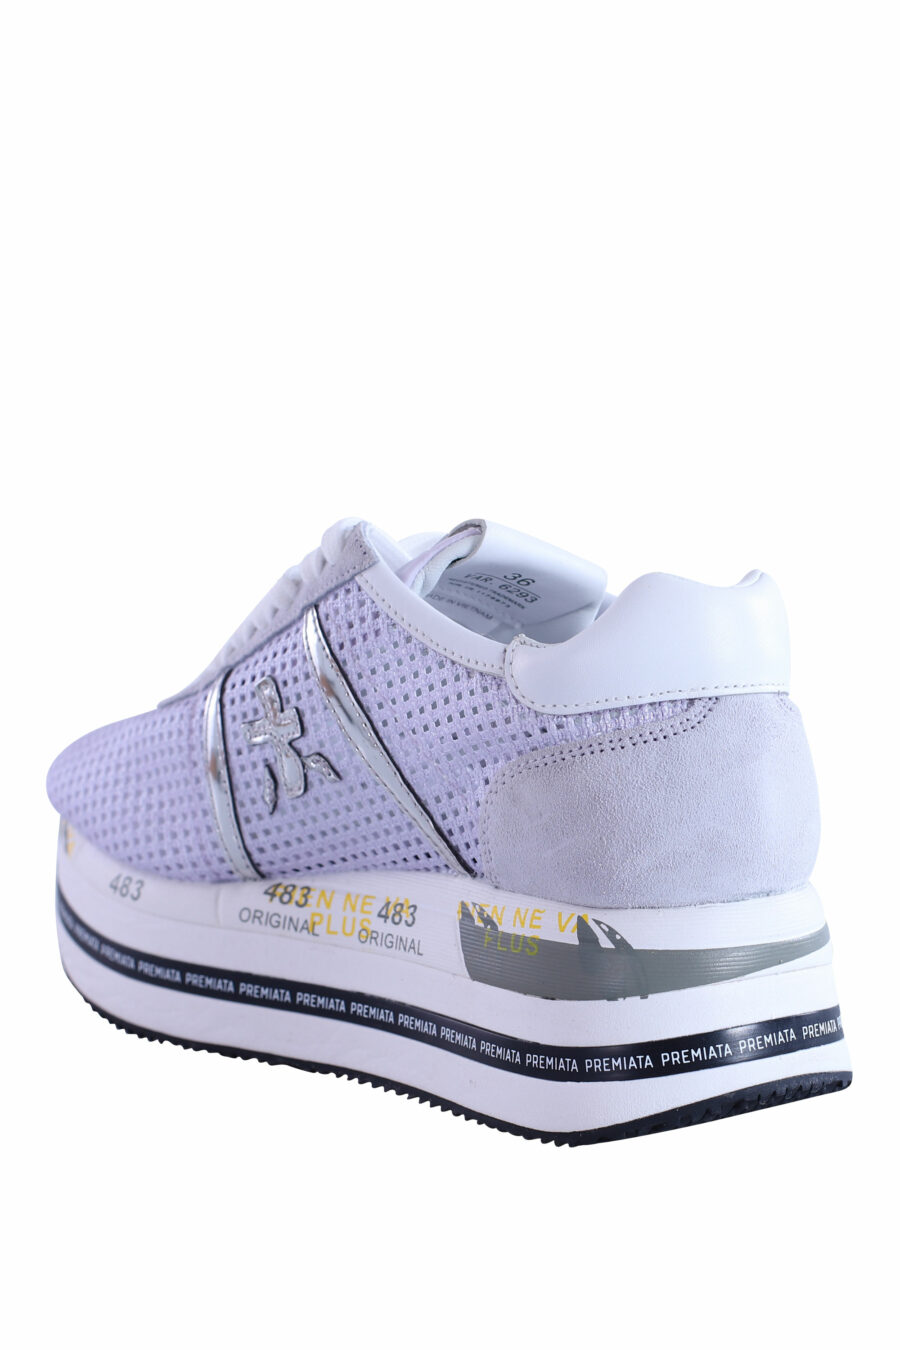 Lilac trainers with platform "beth 6293" - IMG 2925